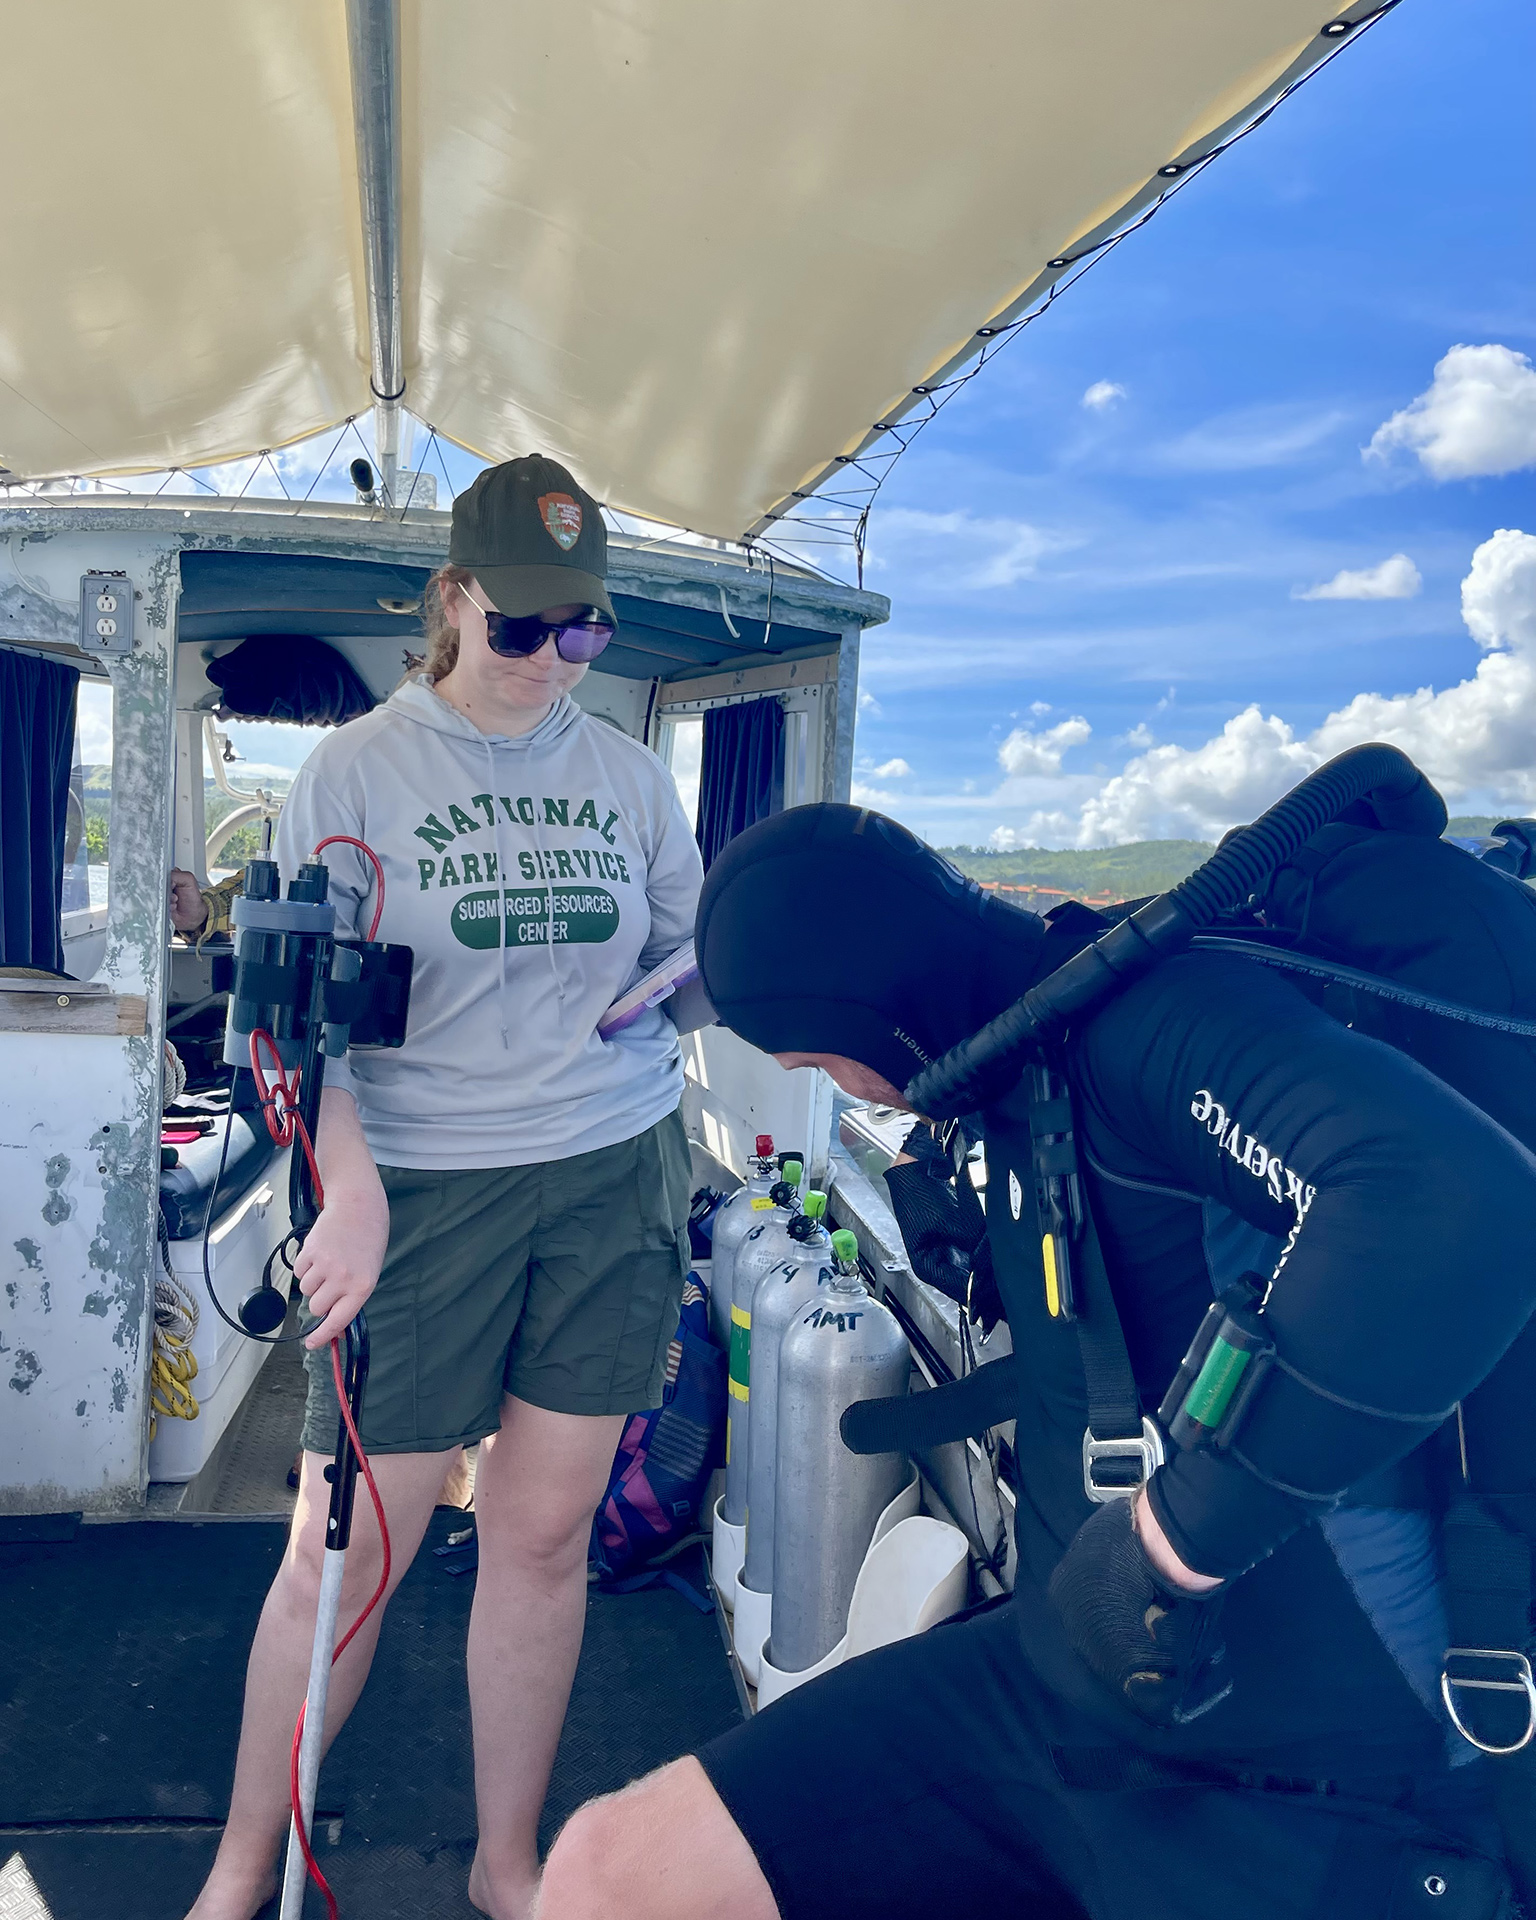 On a dive boat off Guam,  National Park Service Submerged Resources Center team leader and underwater archaeologist Annie Nunn helps fellow archaeologist Matt Hanks prepare to dive (photograph by Russell Worth Parker).